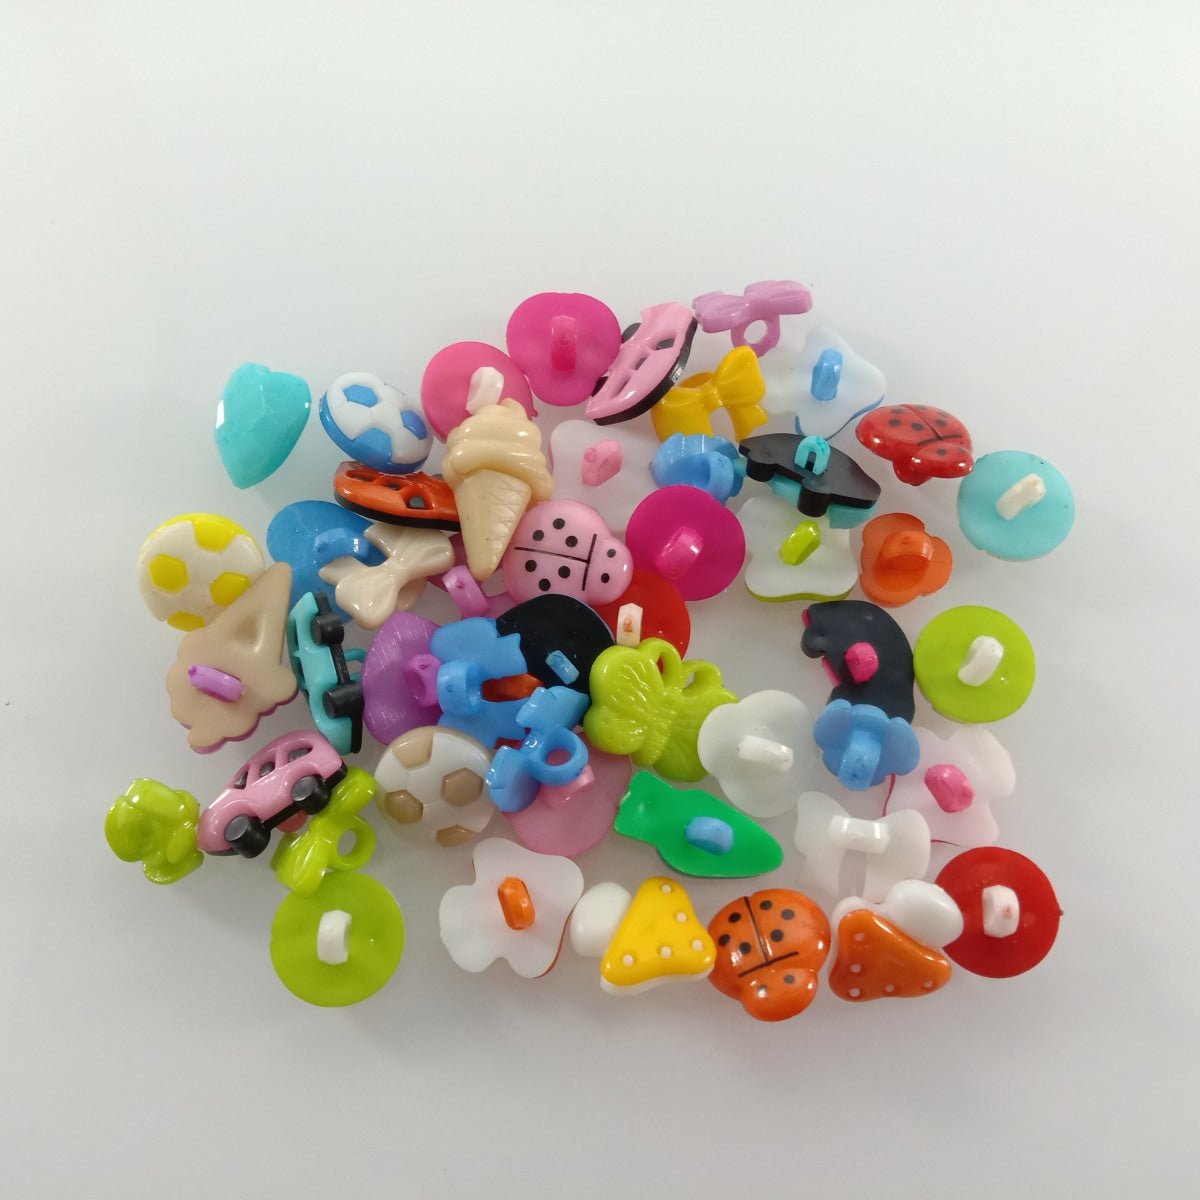 50/100pcs Mixed Shapes Buttons and Brooches for Kids Clothing Plastic Colourful Sewing - 50pcs Set C - - Asia Sell